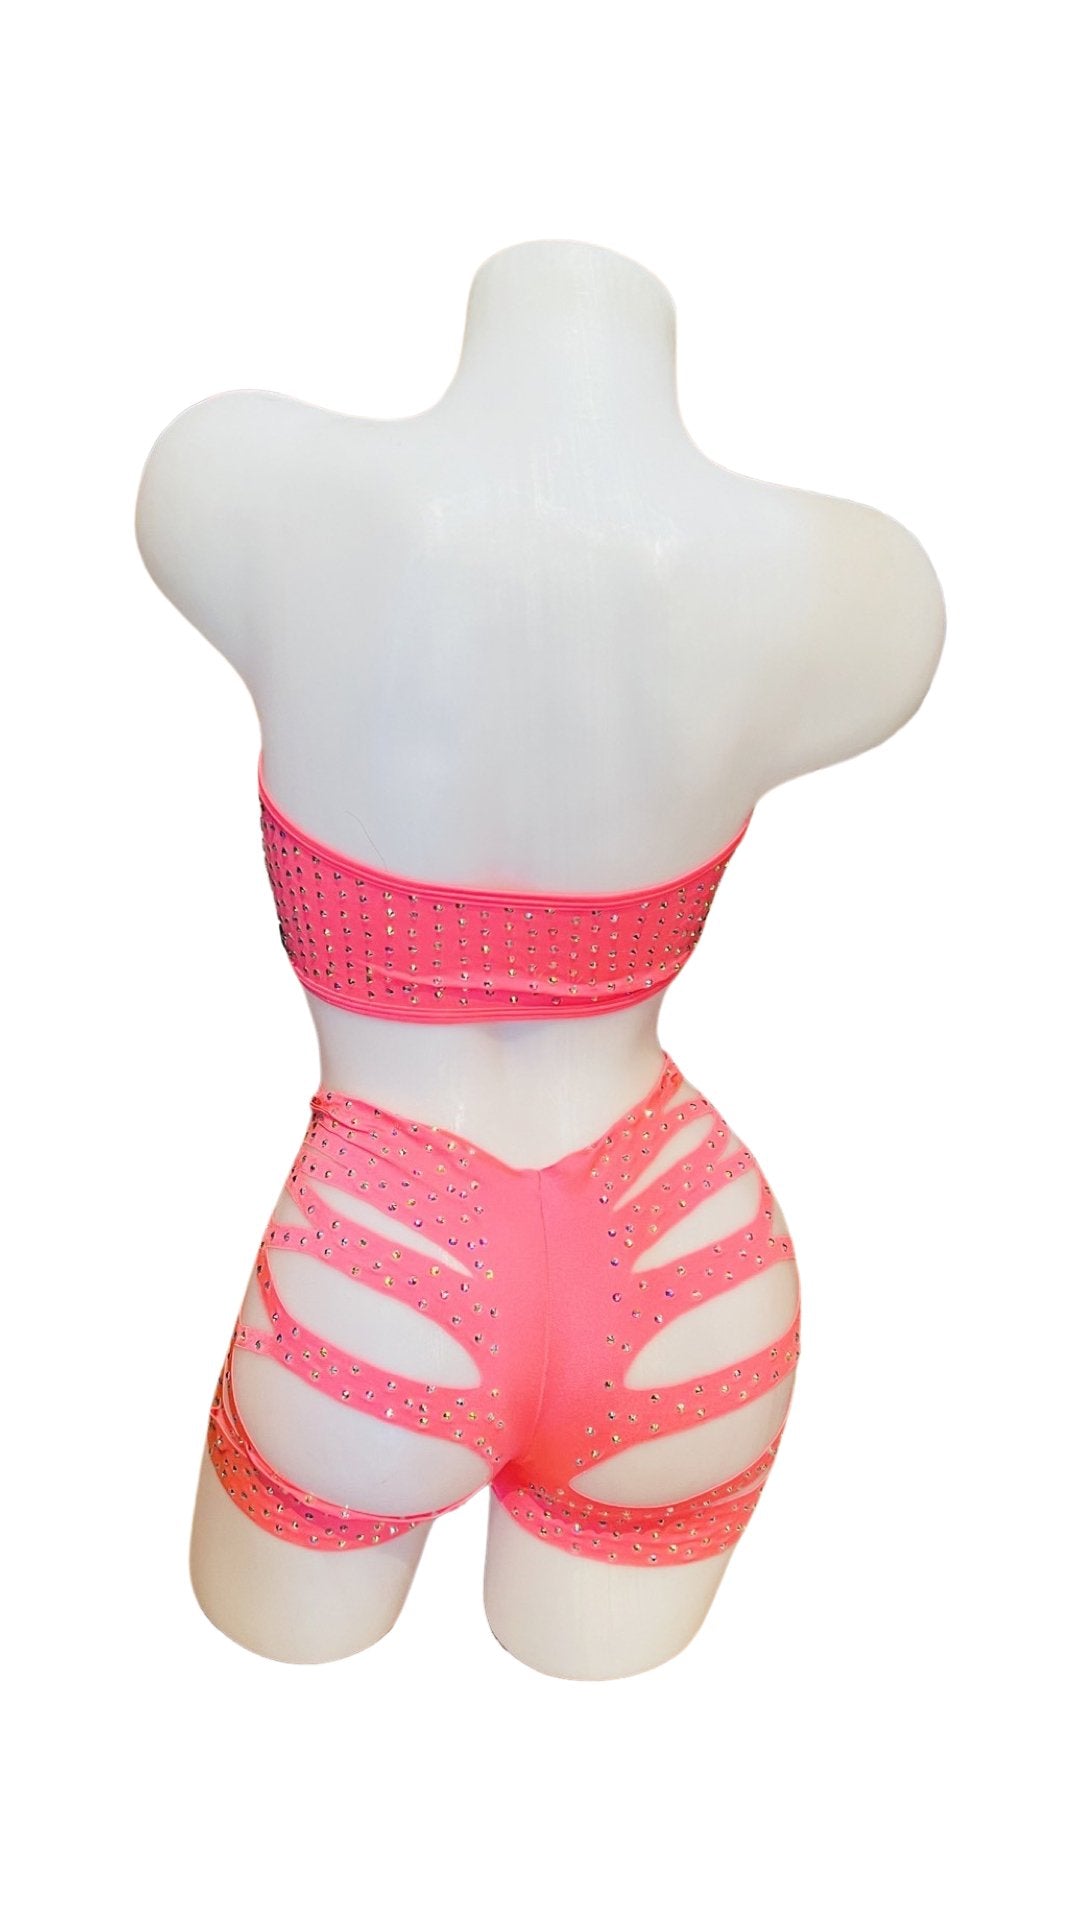 Rhinestone Bandeau Top and Cut Out Short Set Coral - Model Express VancouverBikini